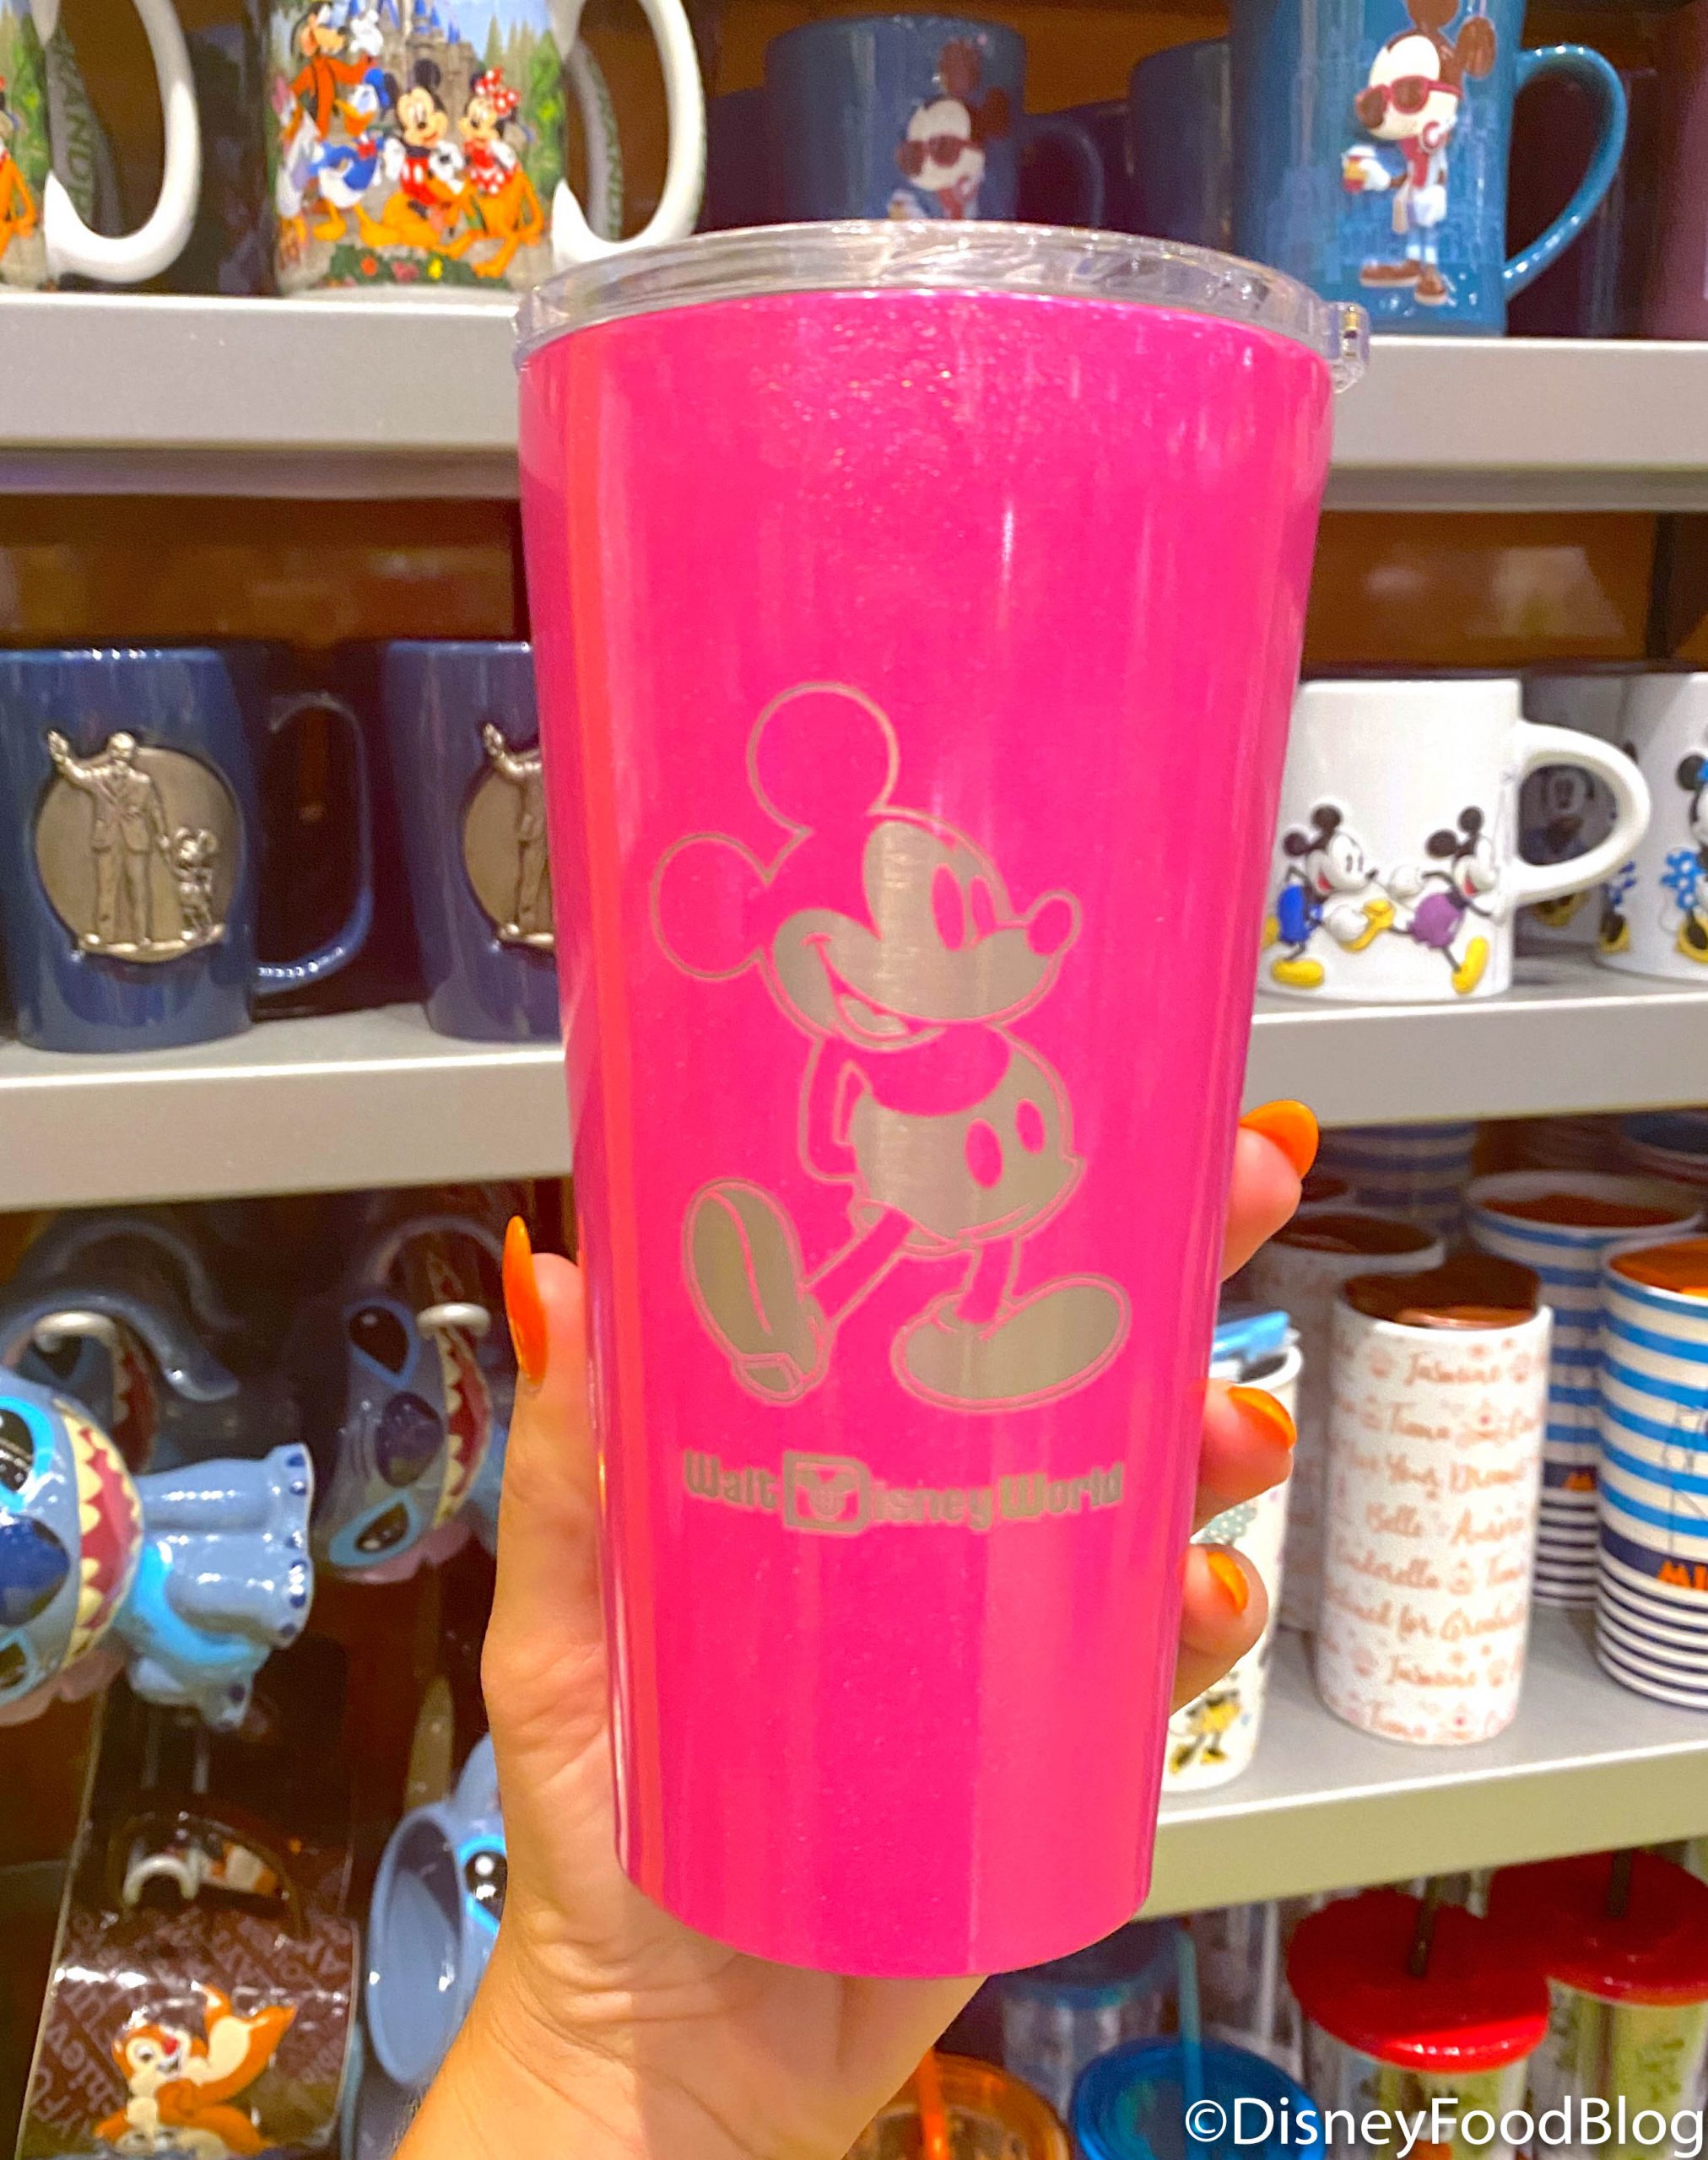 https://www.disneyfoodblog.com/wp-content/uploads/2020/11/2020-reopening-wdw-epcot-mickey-pink-corkcicle-tumbler-scaled.jpg